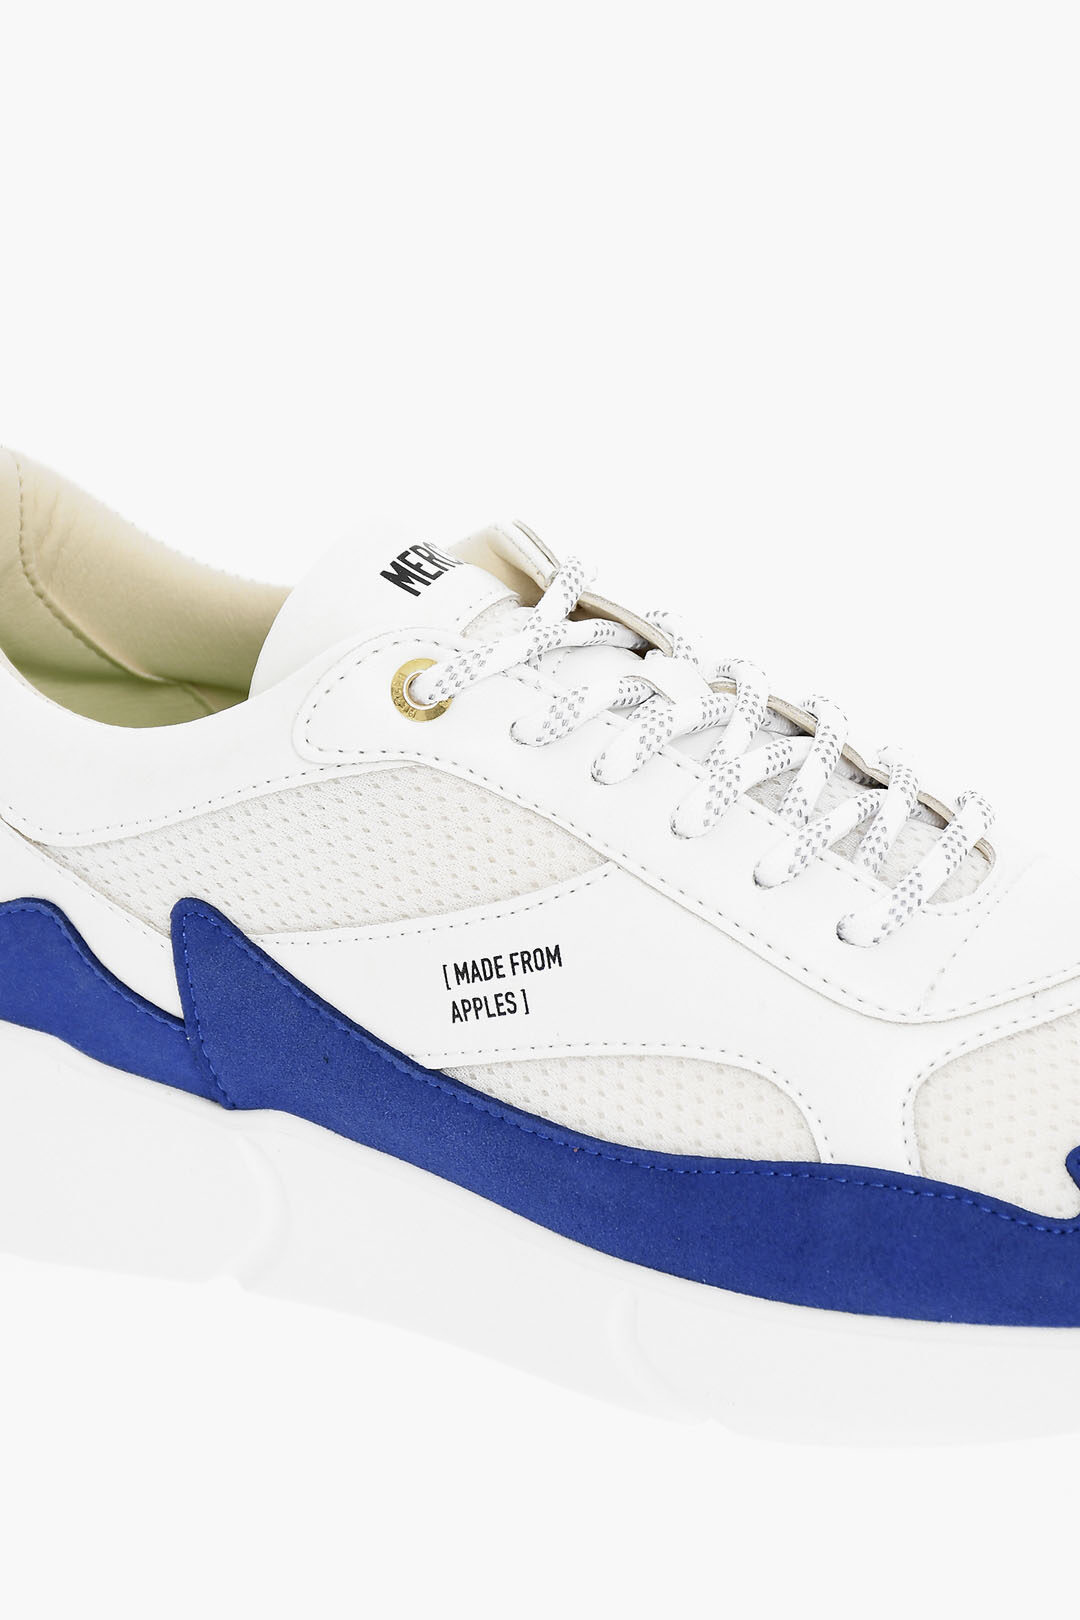 valse adelig Glorious Mercer Amsterdam Low-top APPLE Sneakers With Rubber Sole men - Glamood  Outlet